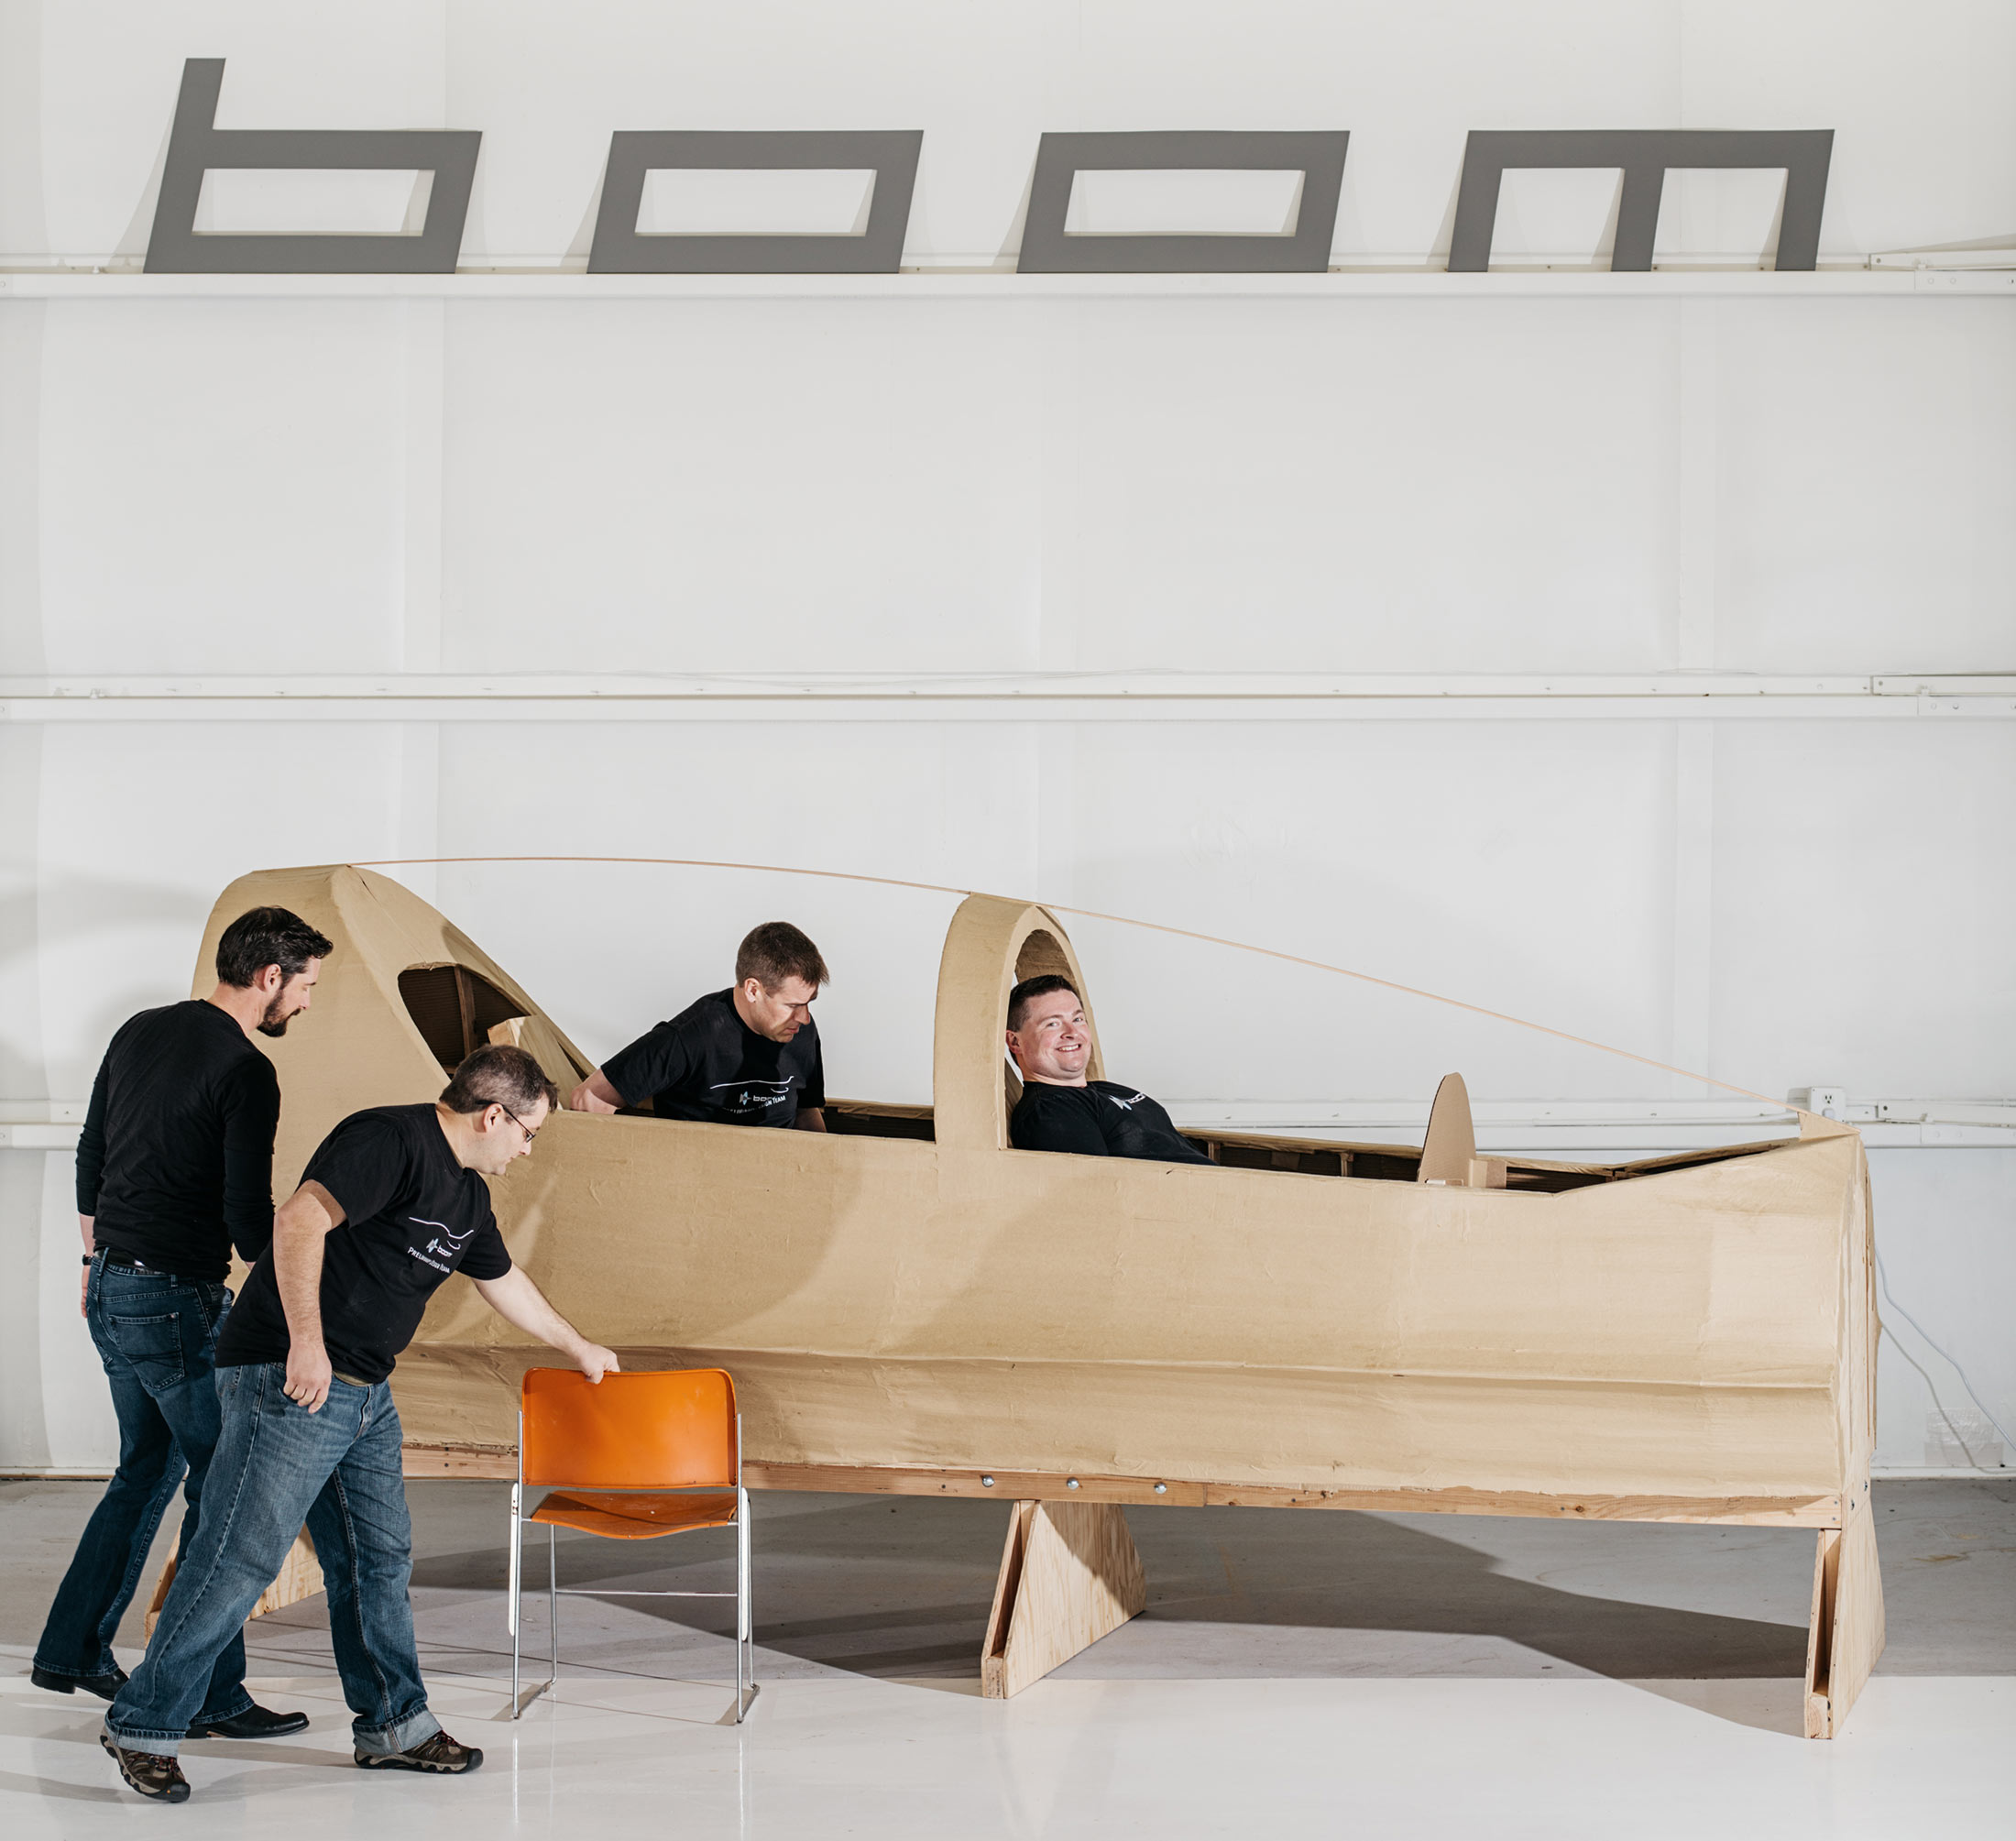 Joe Wilding, Boom’s chief engineer, and Blake Scholl, Boom’s founder and chief executive officer,  sit in a model of cockpit made from cardboard and plywood.
